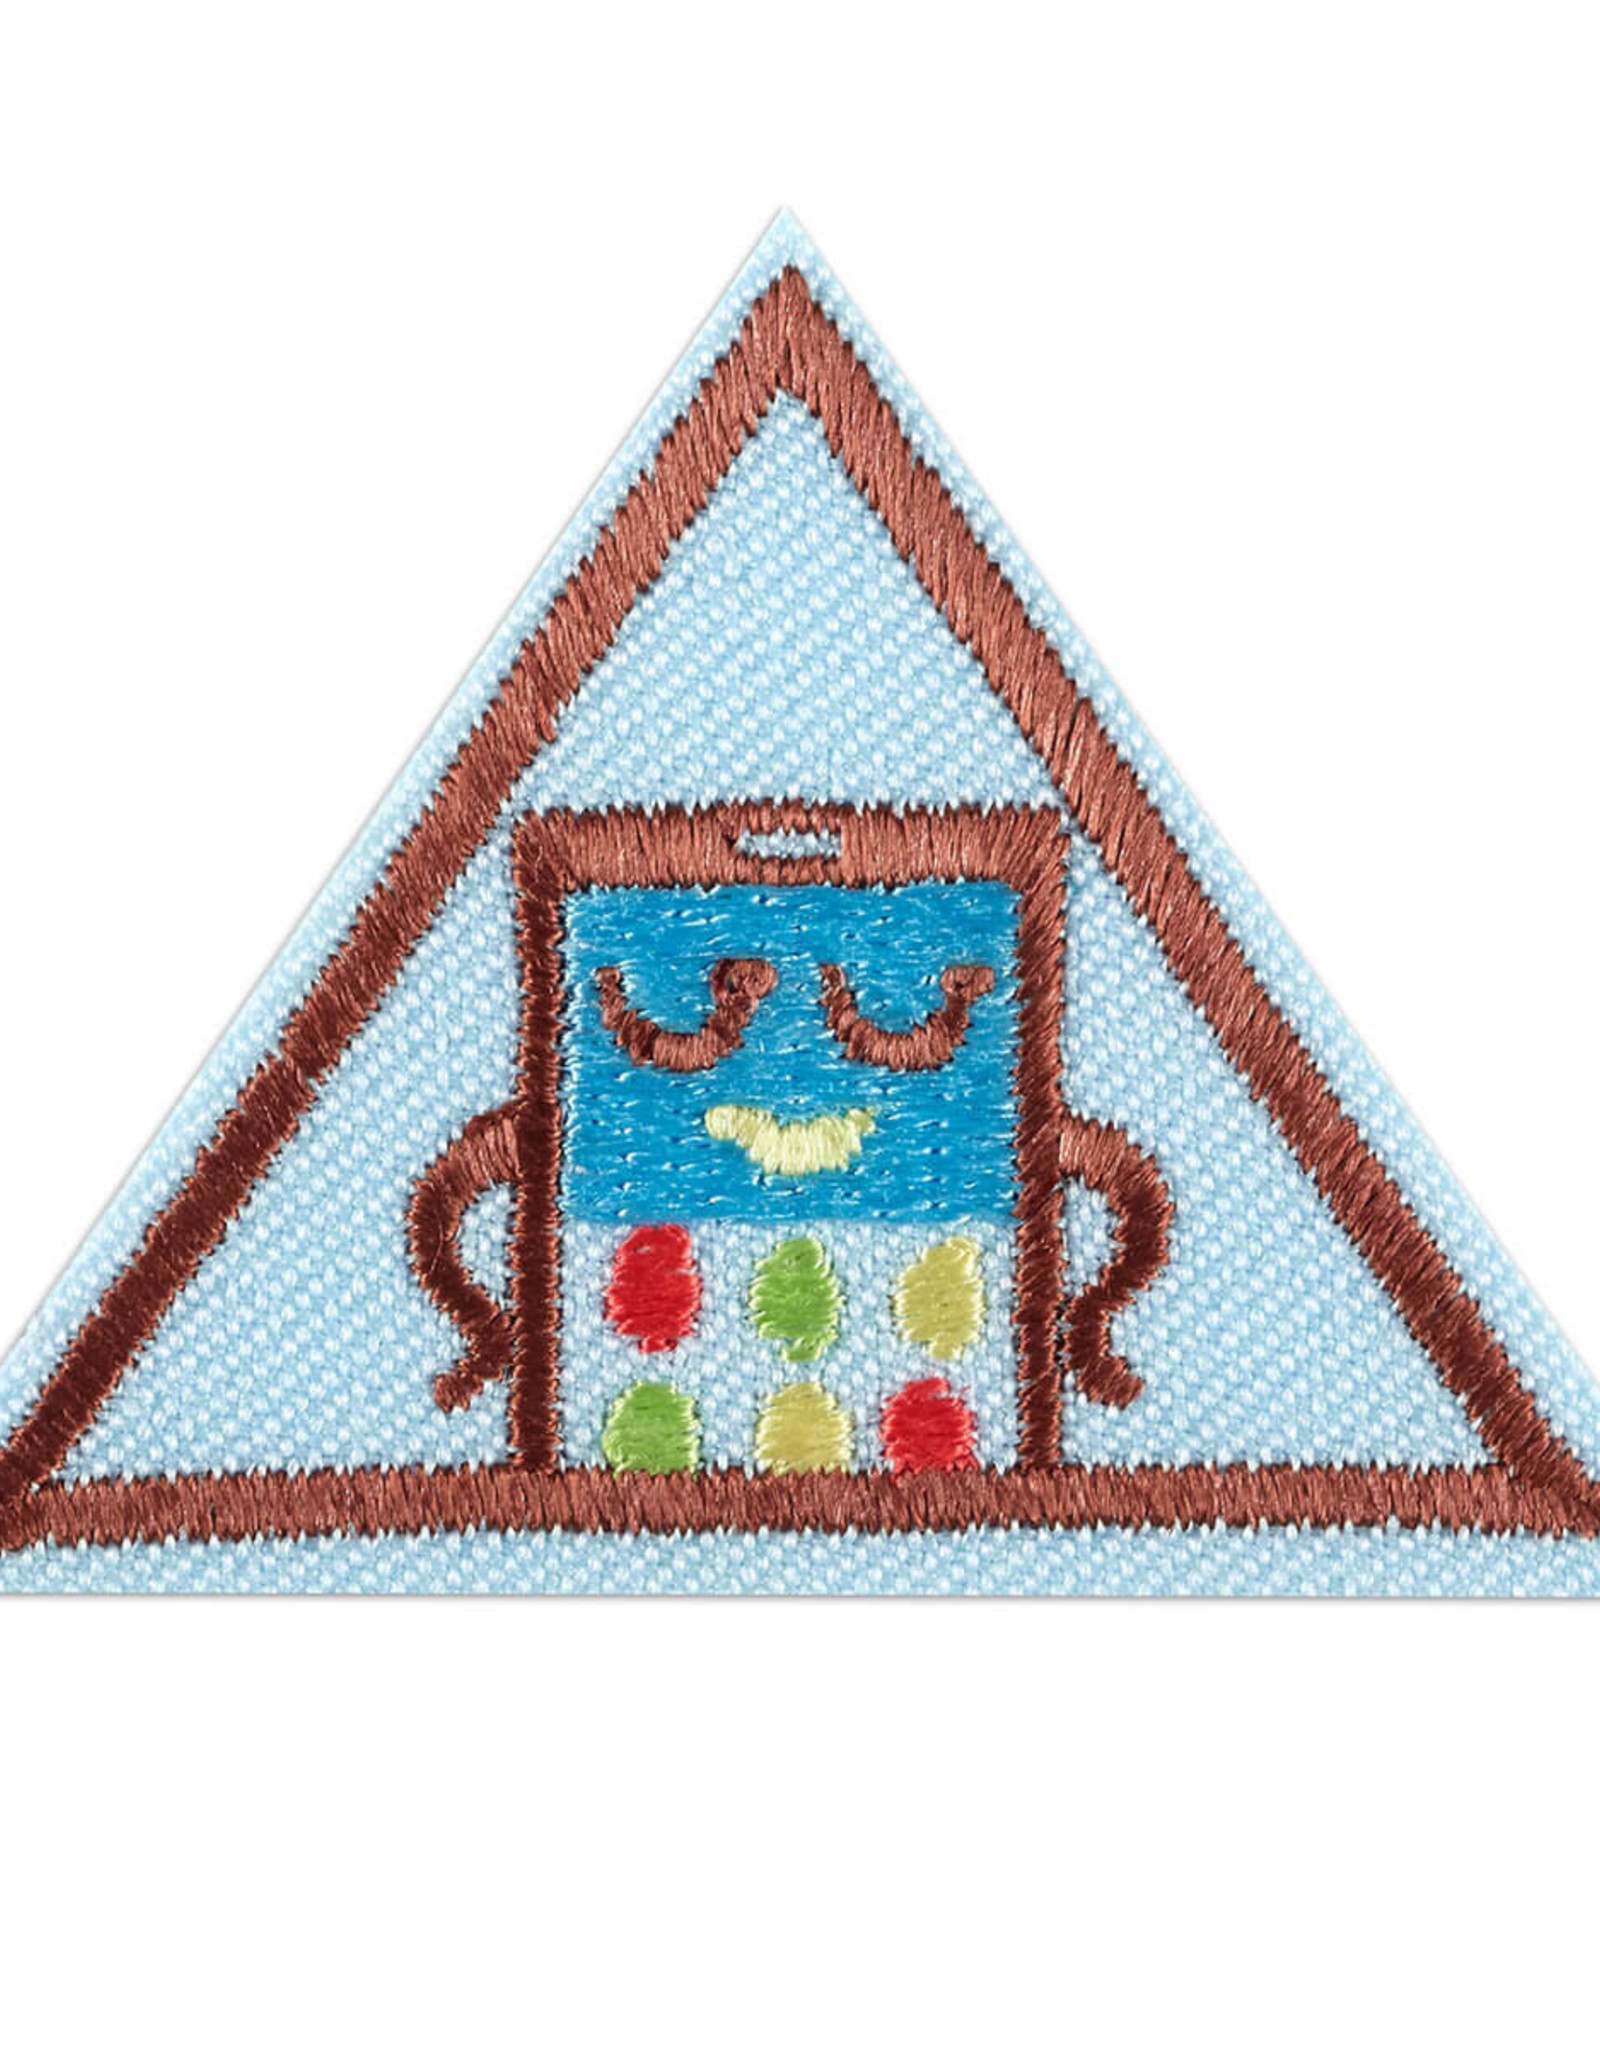 GIRL SCOUTS OF THE USA Brownie Coding for Good 3: App Development Badge